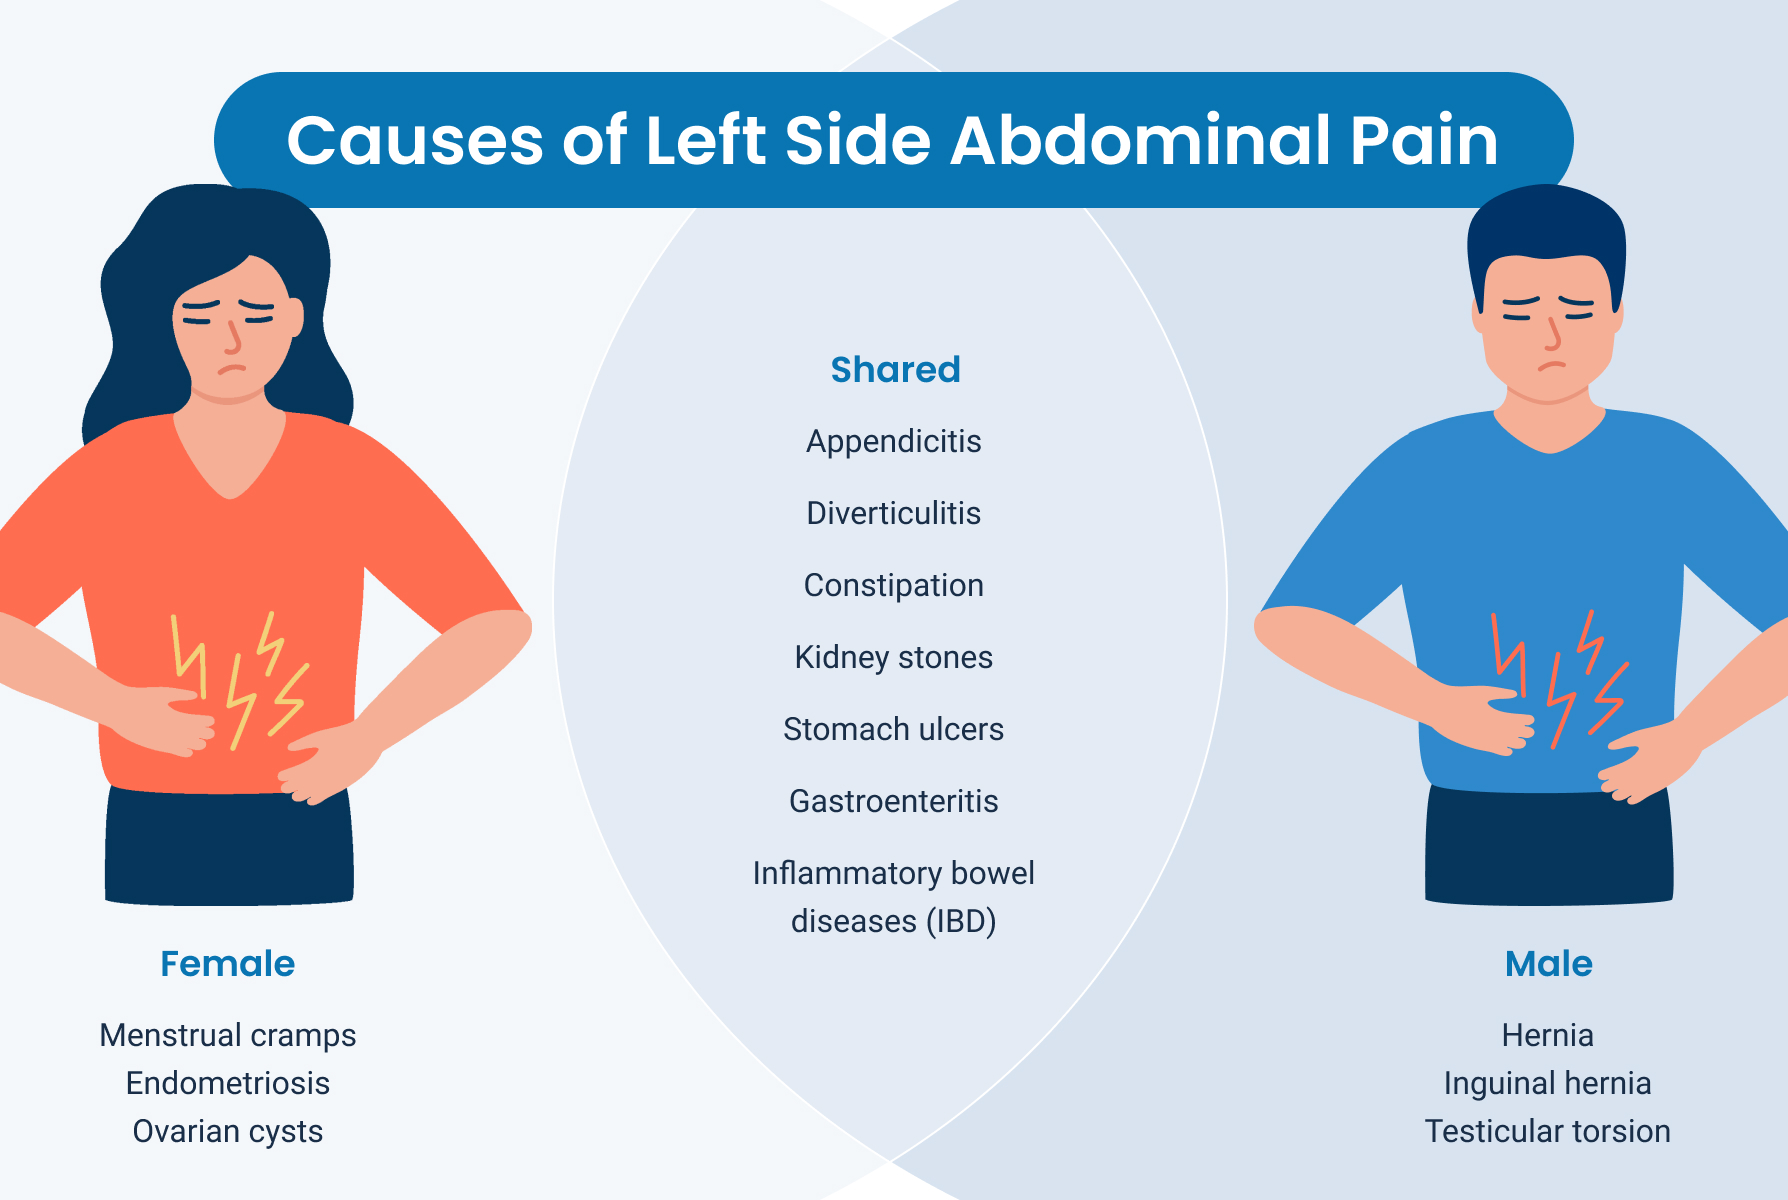 What Causes Lower Abdominal Pain in Females